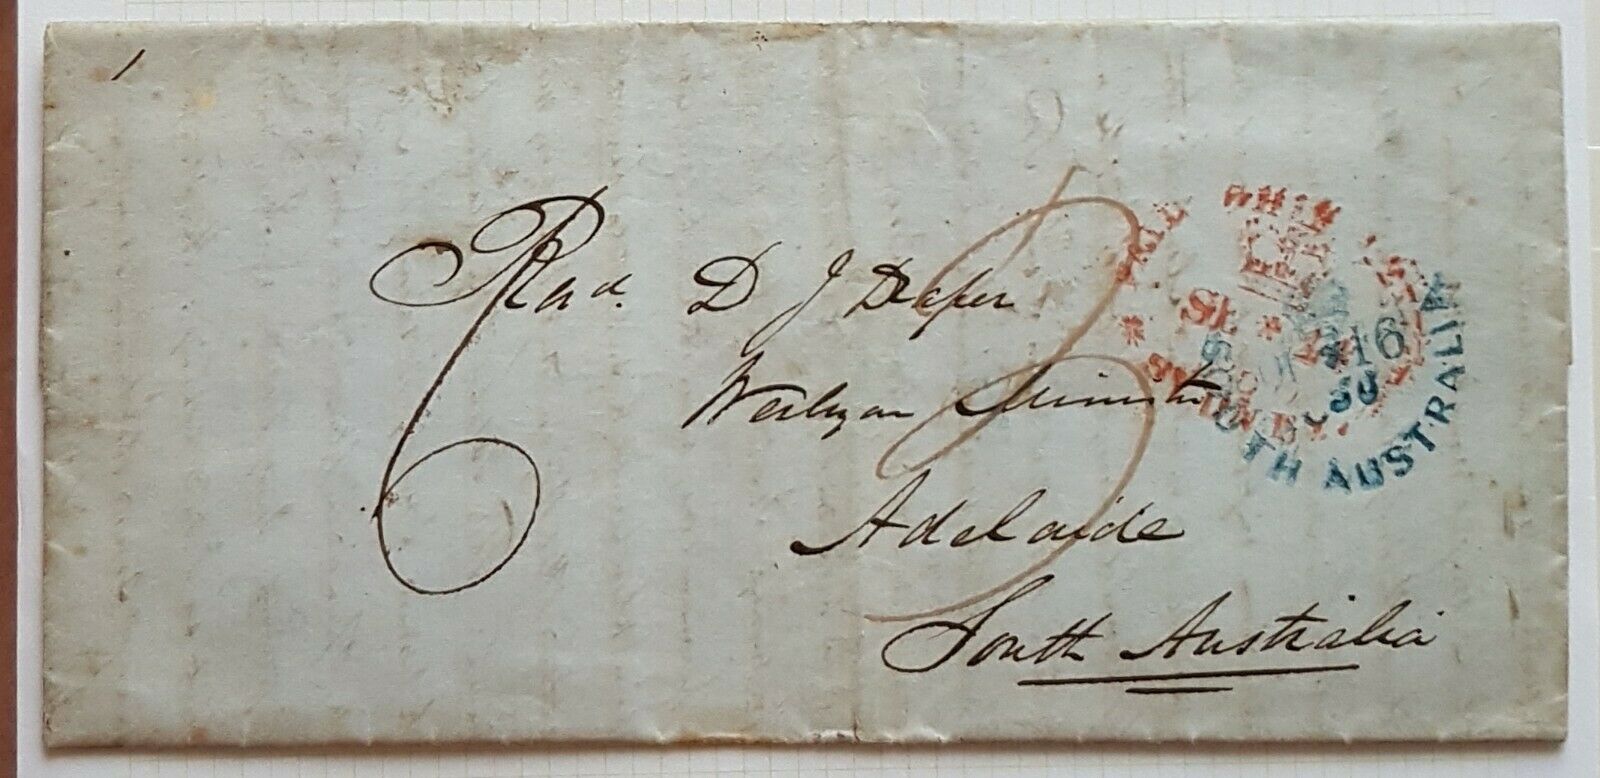 SA, NSW, Australian States, GB, 1850 Sydney to Adelaide underpaid ship letter